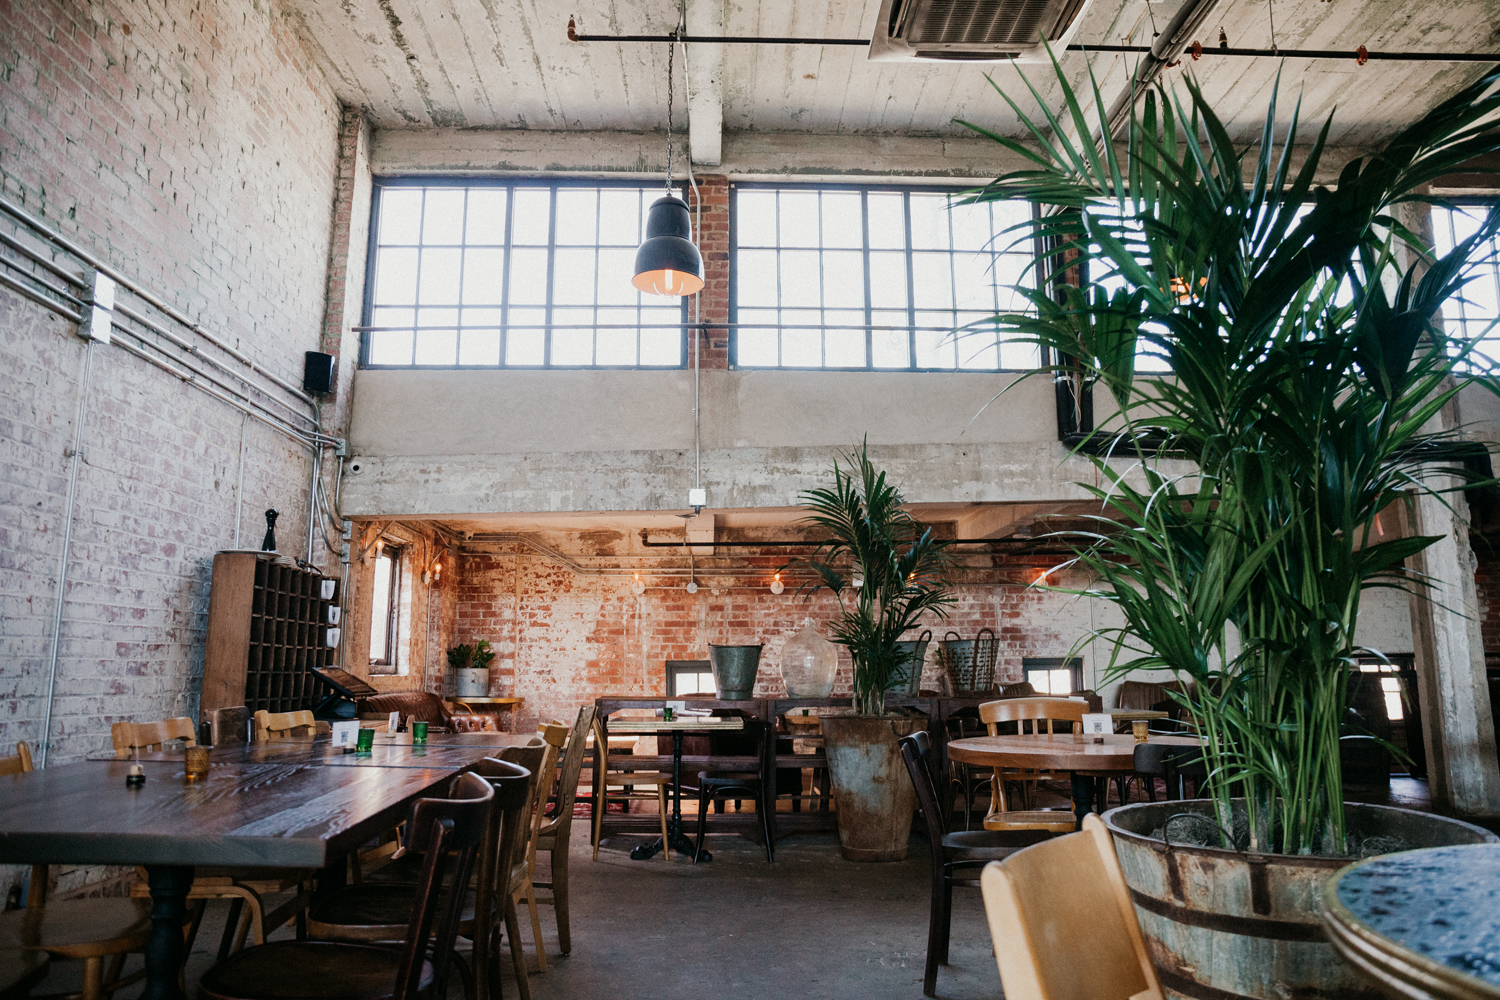 Image of Provender Hall pre-evening service, An empty restaurant in an industrial space with exposed brick and lush plants